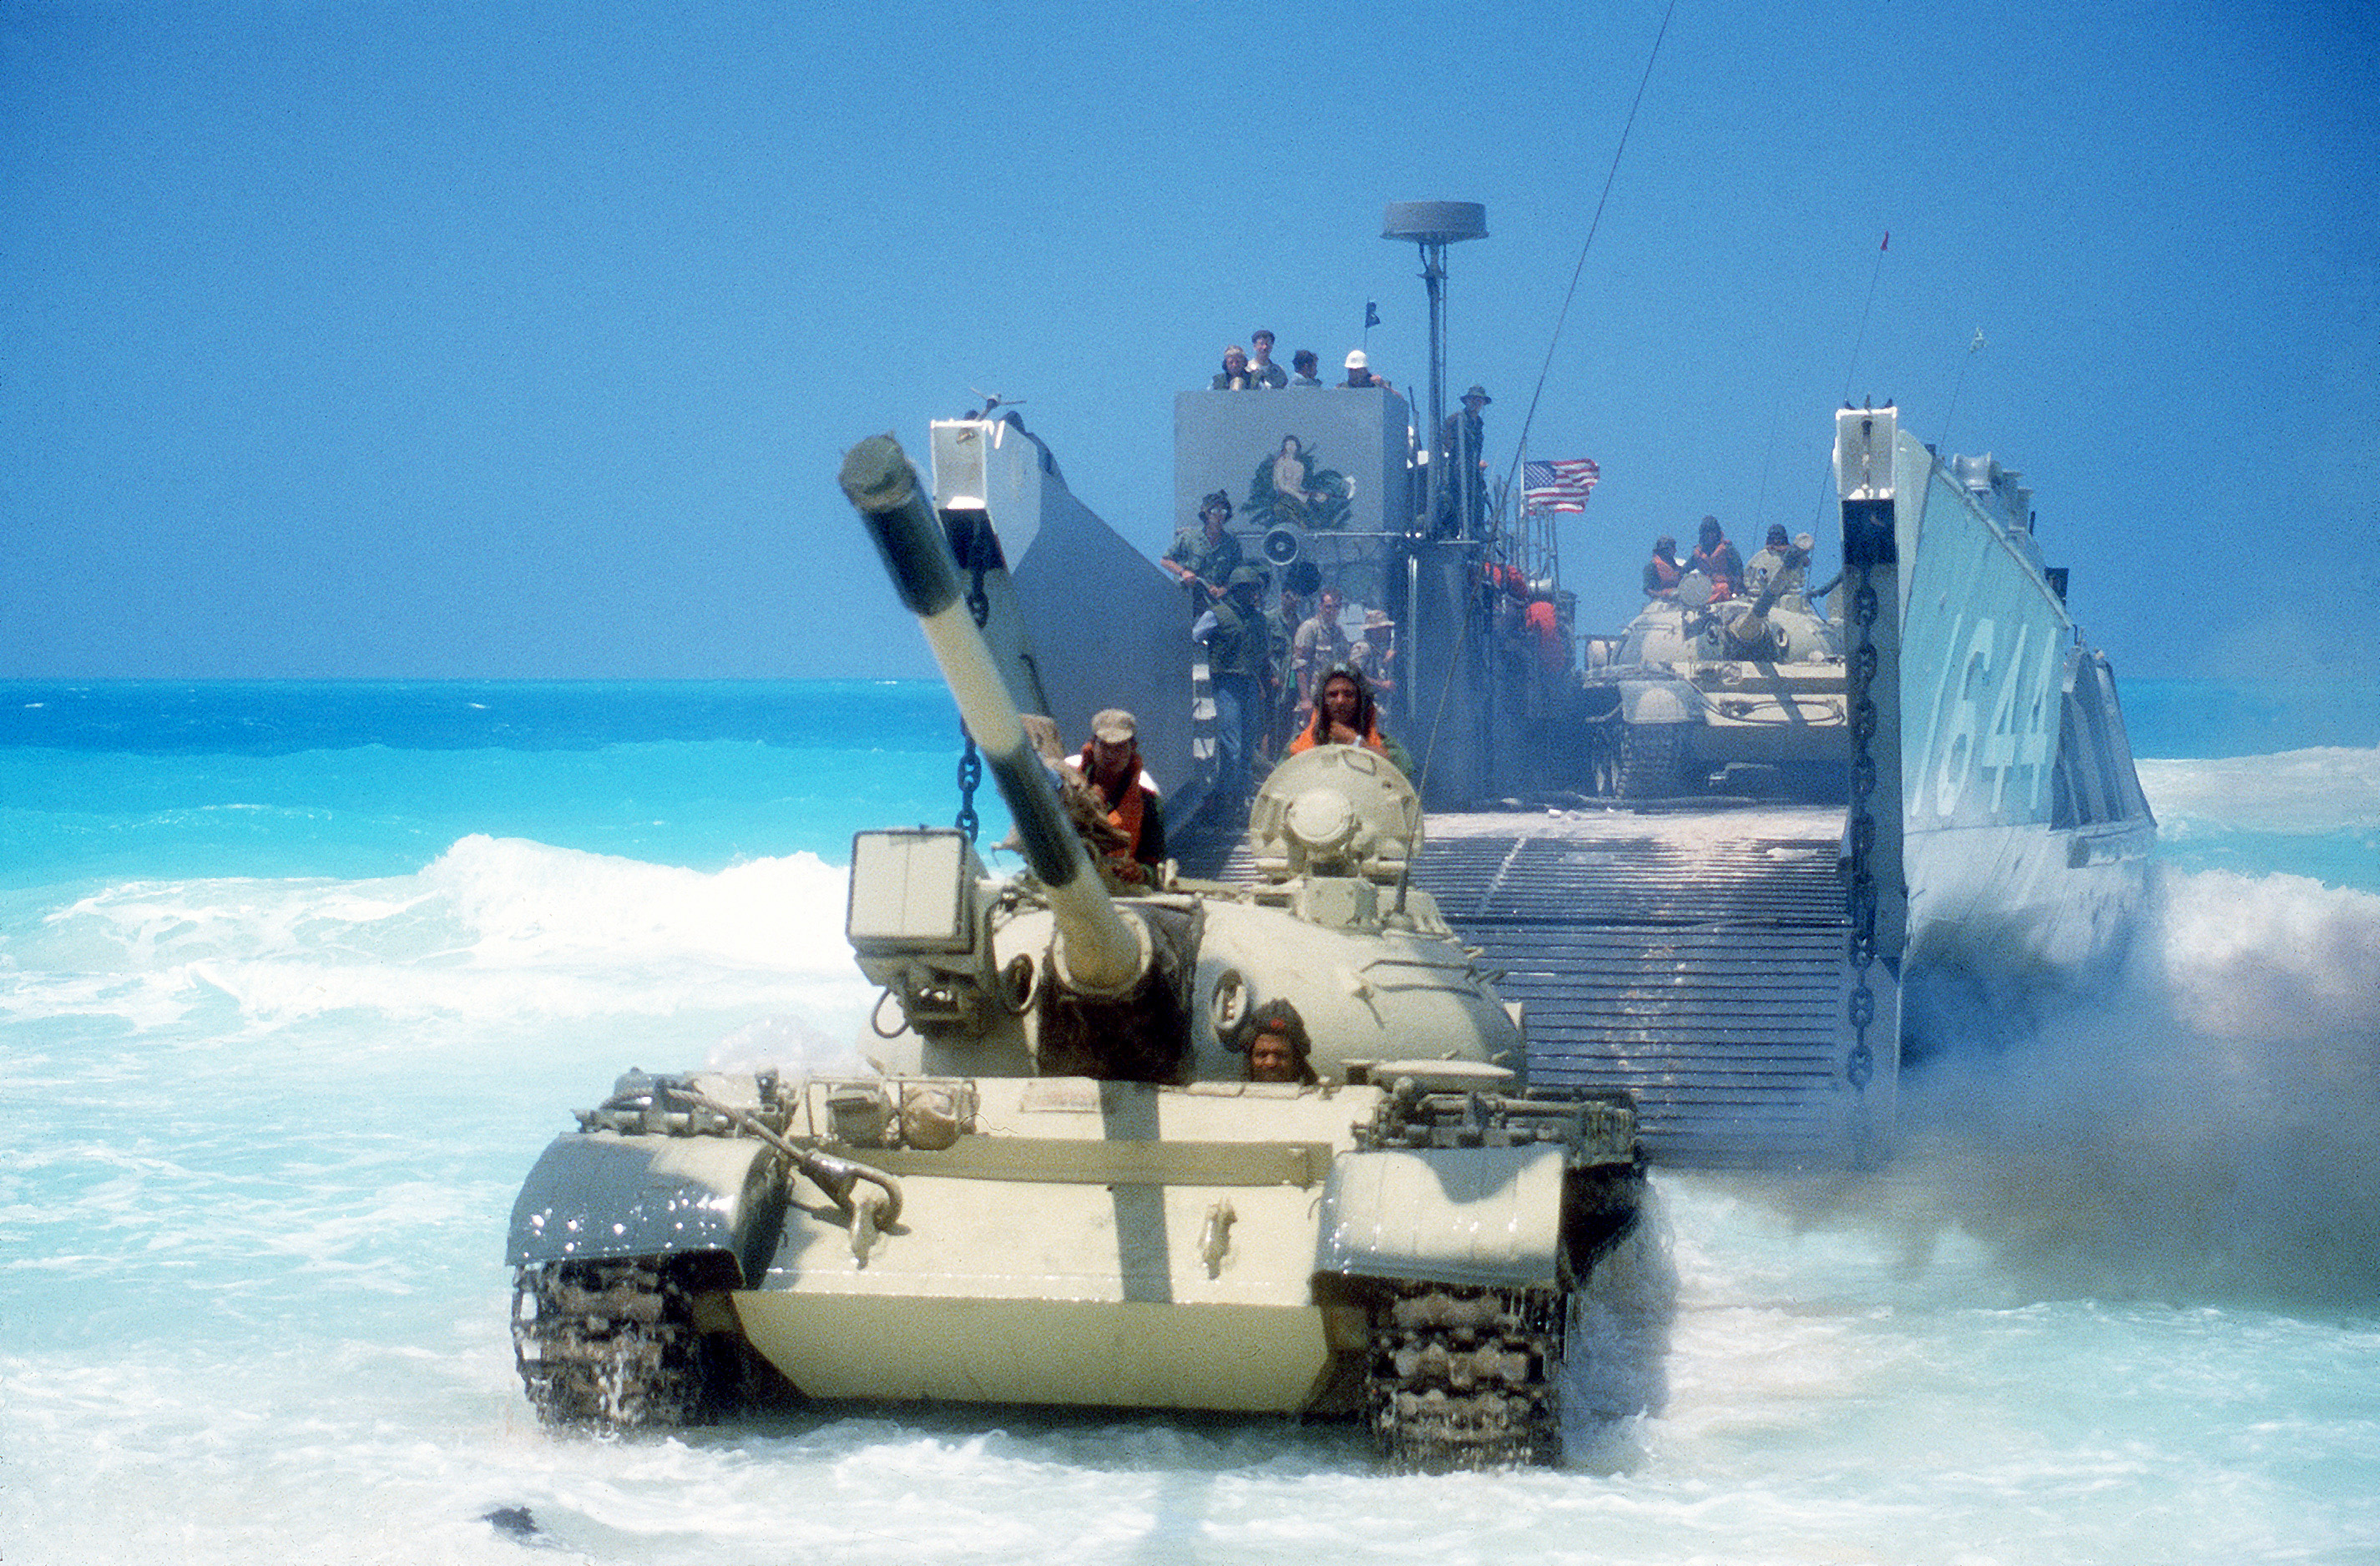 Egyptian_T-55_tank_disembarking_LCU-1644_during_Exercise_Bright_Star_1985_DF-ST-86-08080.jpg